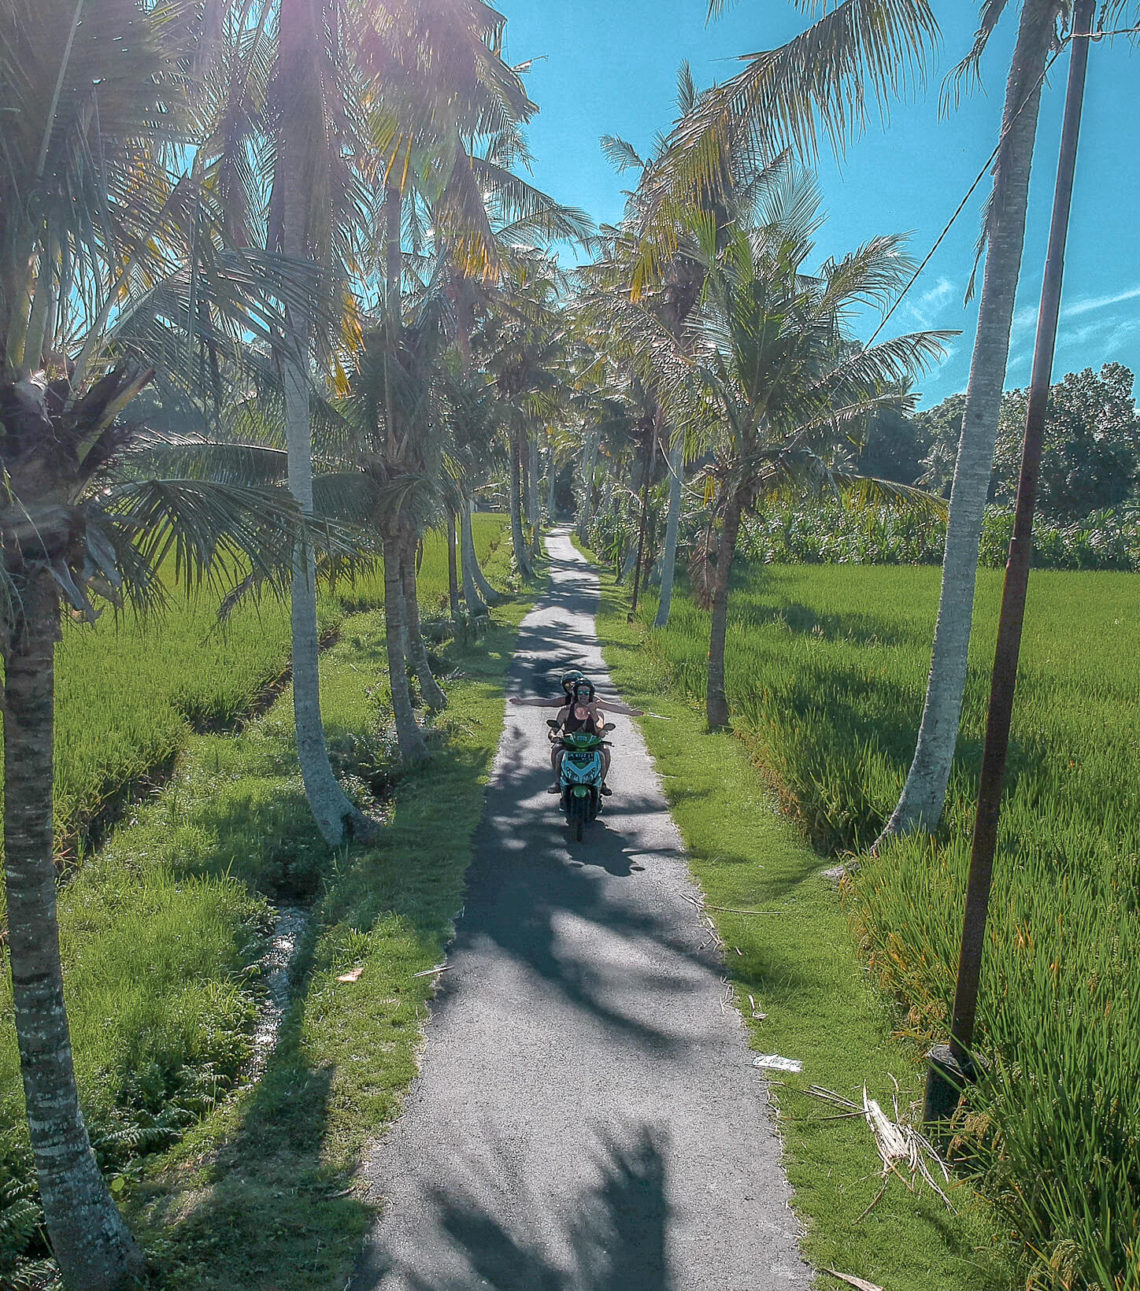 Gemma and Campbell Riding a Scooter in Bali